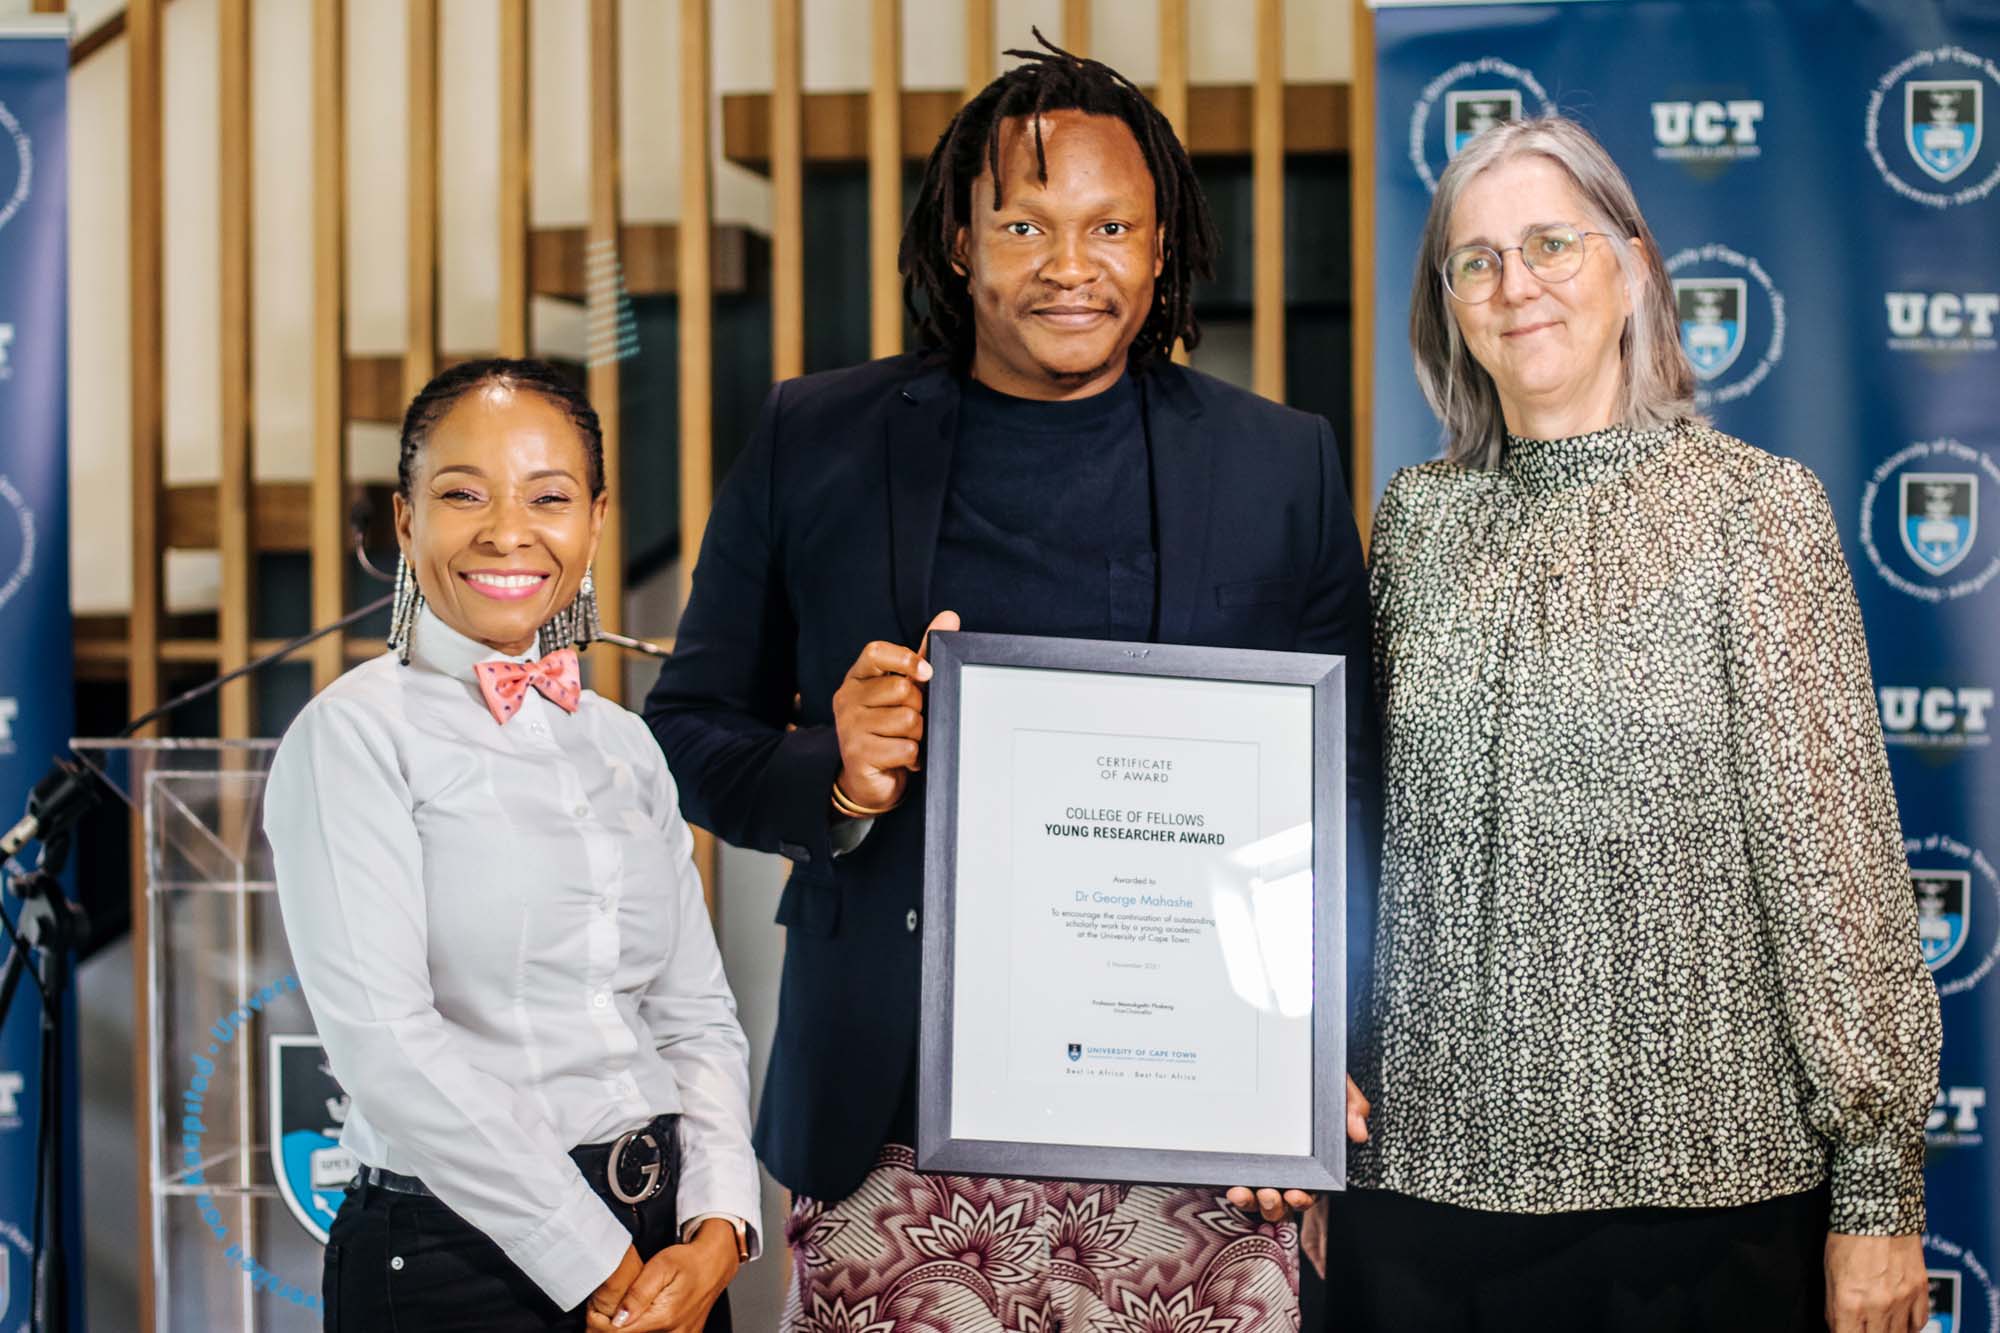 The annual UCT College of Fellows 2021 cocktail reception was held at the Skotnes Restaurant, Norval Foundation Art Museum in Tokai. Hosted by the Vice-Chancellor, Professor Mamokgethi Phakeng, with Deputy Vice-Chancellor: Research & Internationalisation, Professor Sue Harrison as co-host. The event included the handover of College of Fellows Young Researcher Awards 2021.
